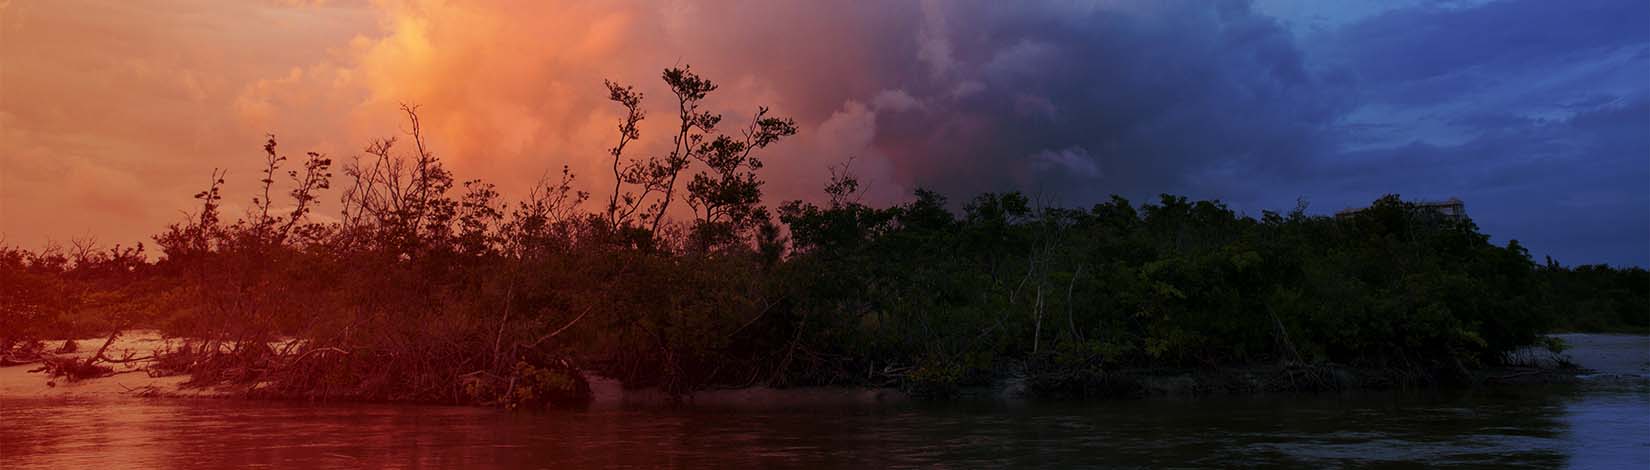 A storm cloud photographed at sunset over a coastal mangrove in Naples, Florida.